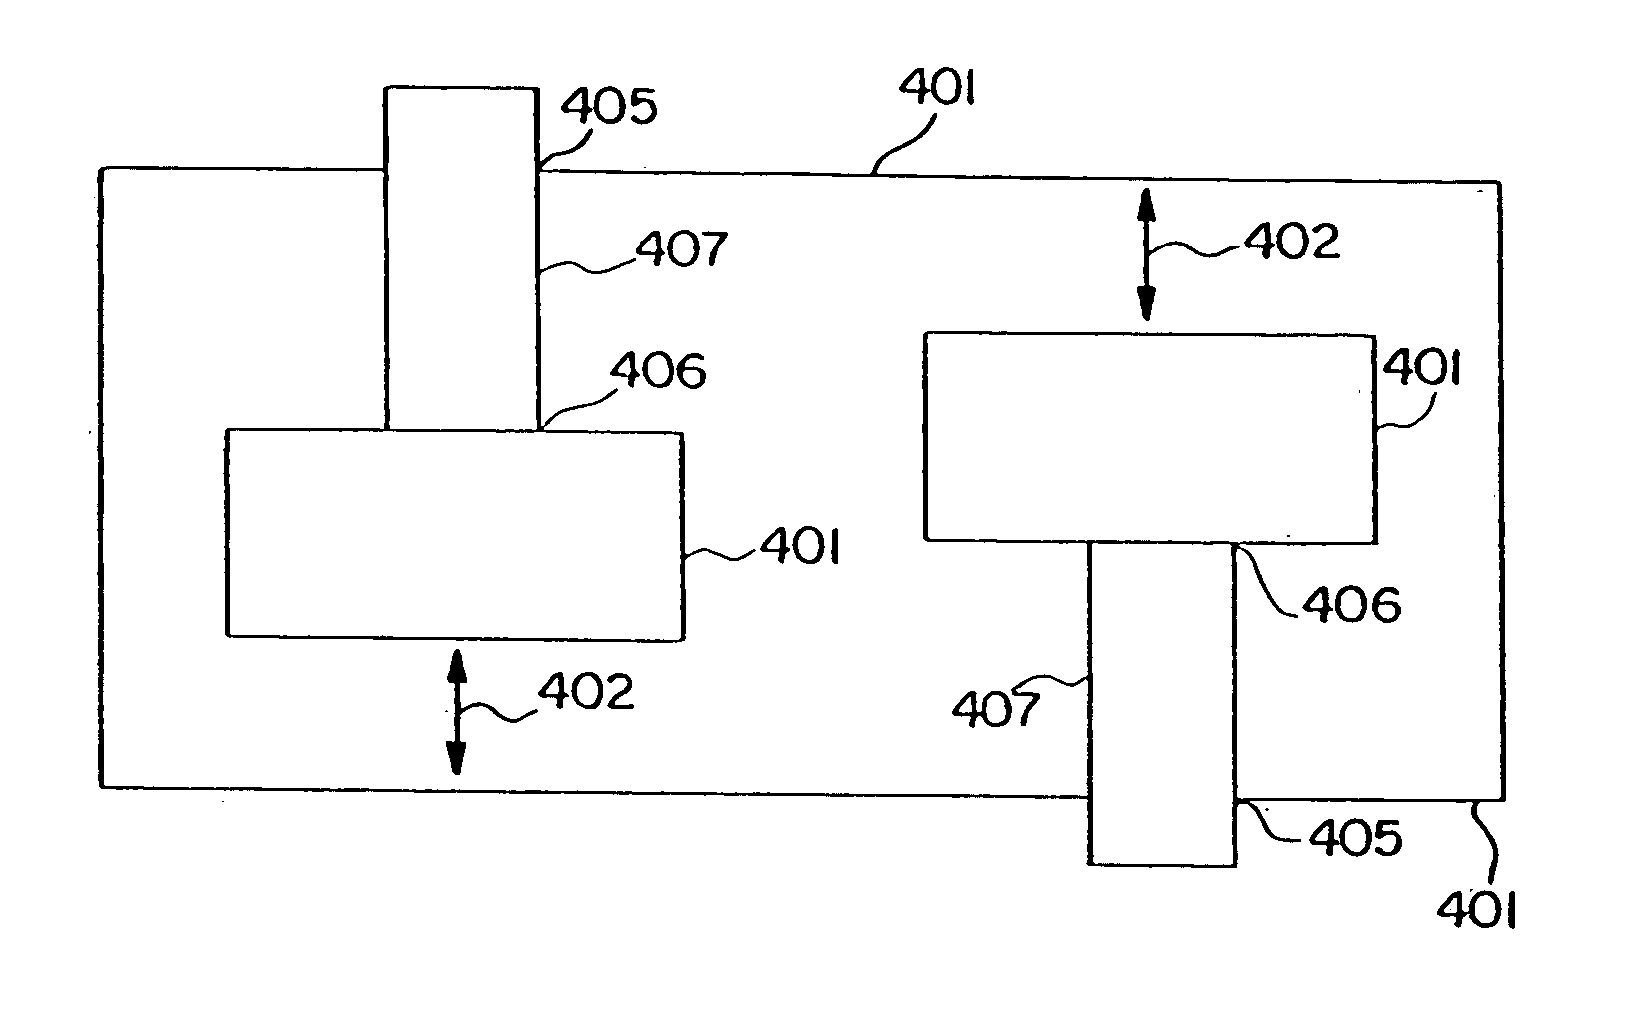 Method and mechanism for tuning dielectric resonator circuits